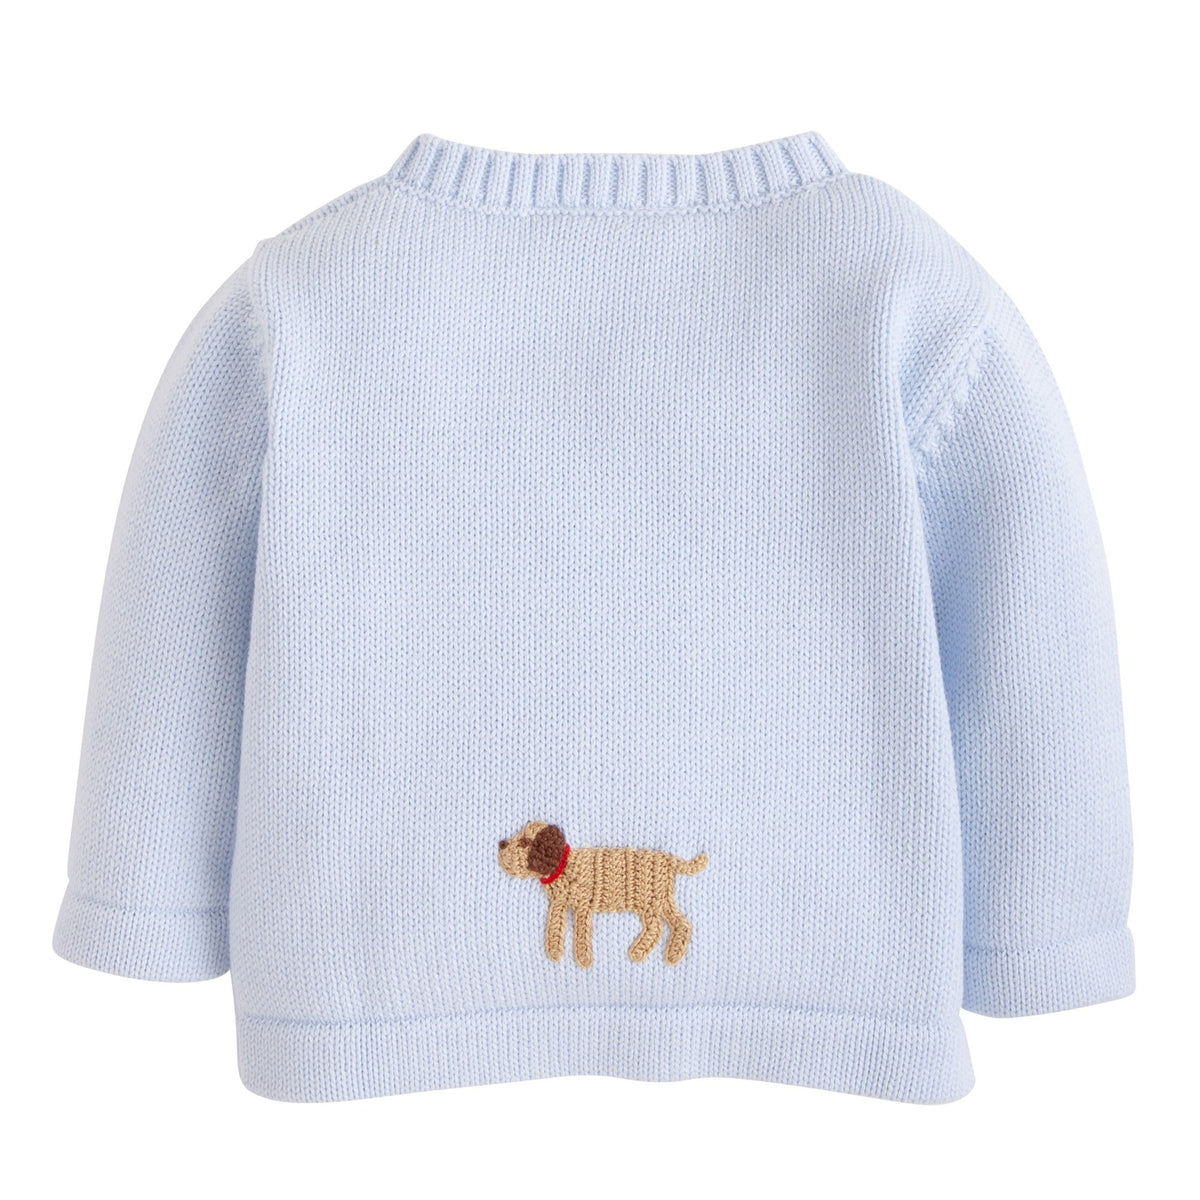 seguridadindustrialcr traditional baby clothing, signature crochet sweater with lab for baby boy